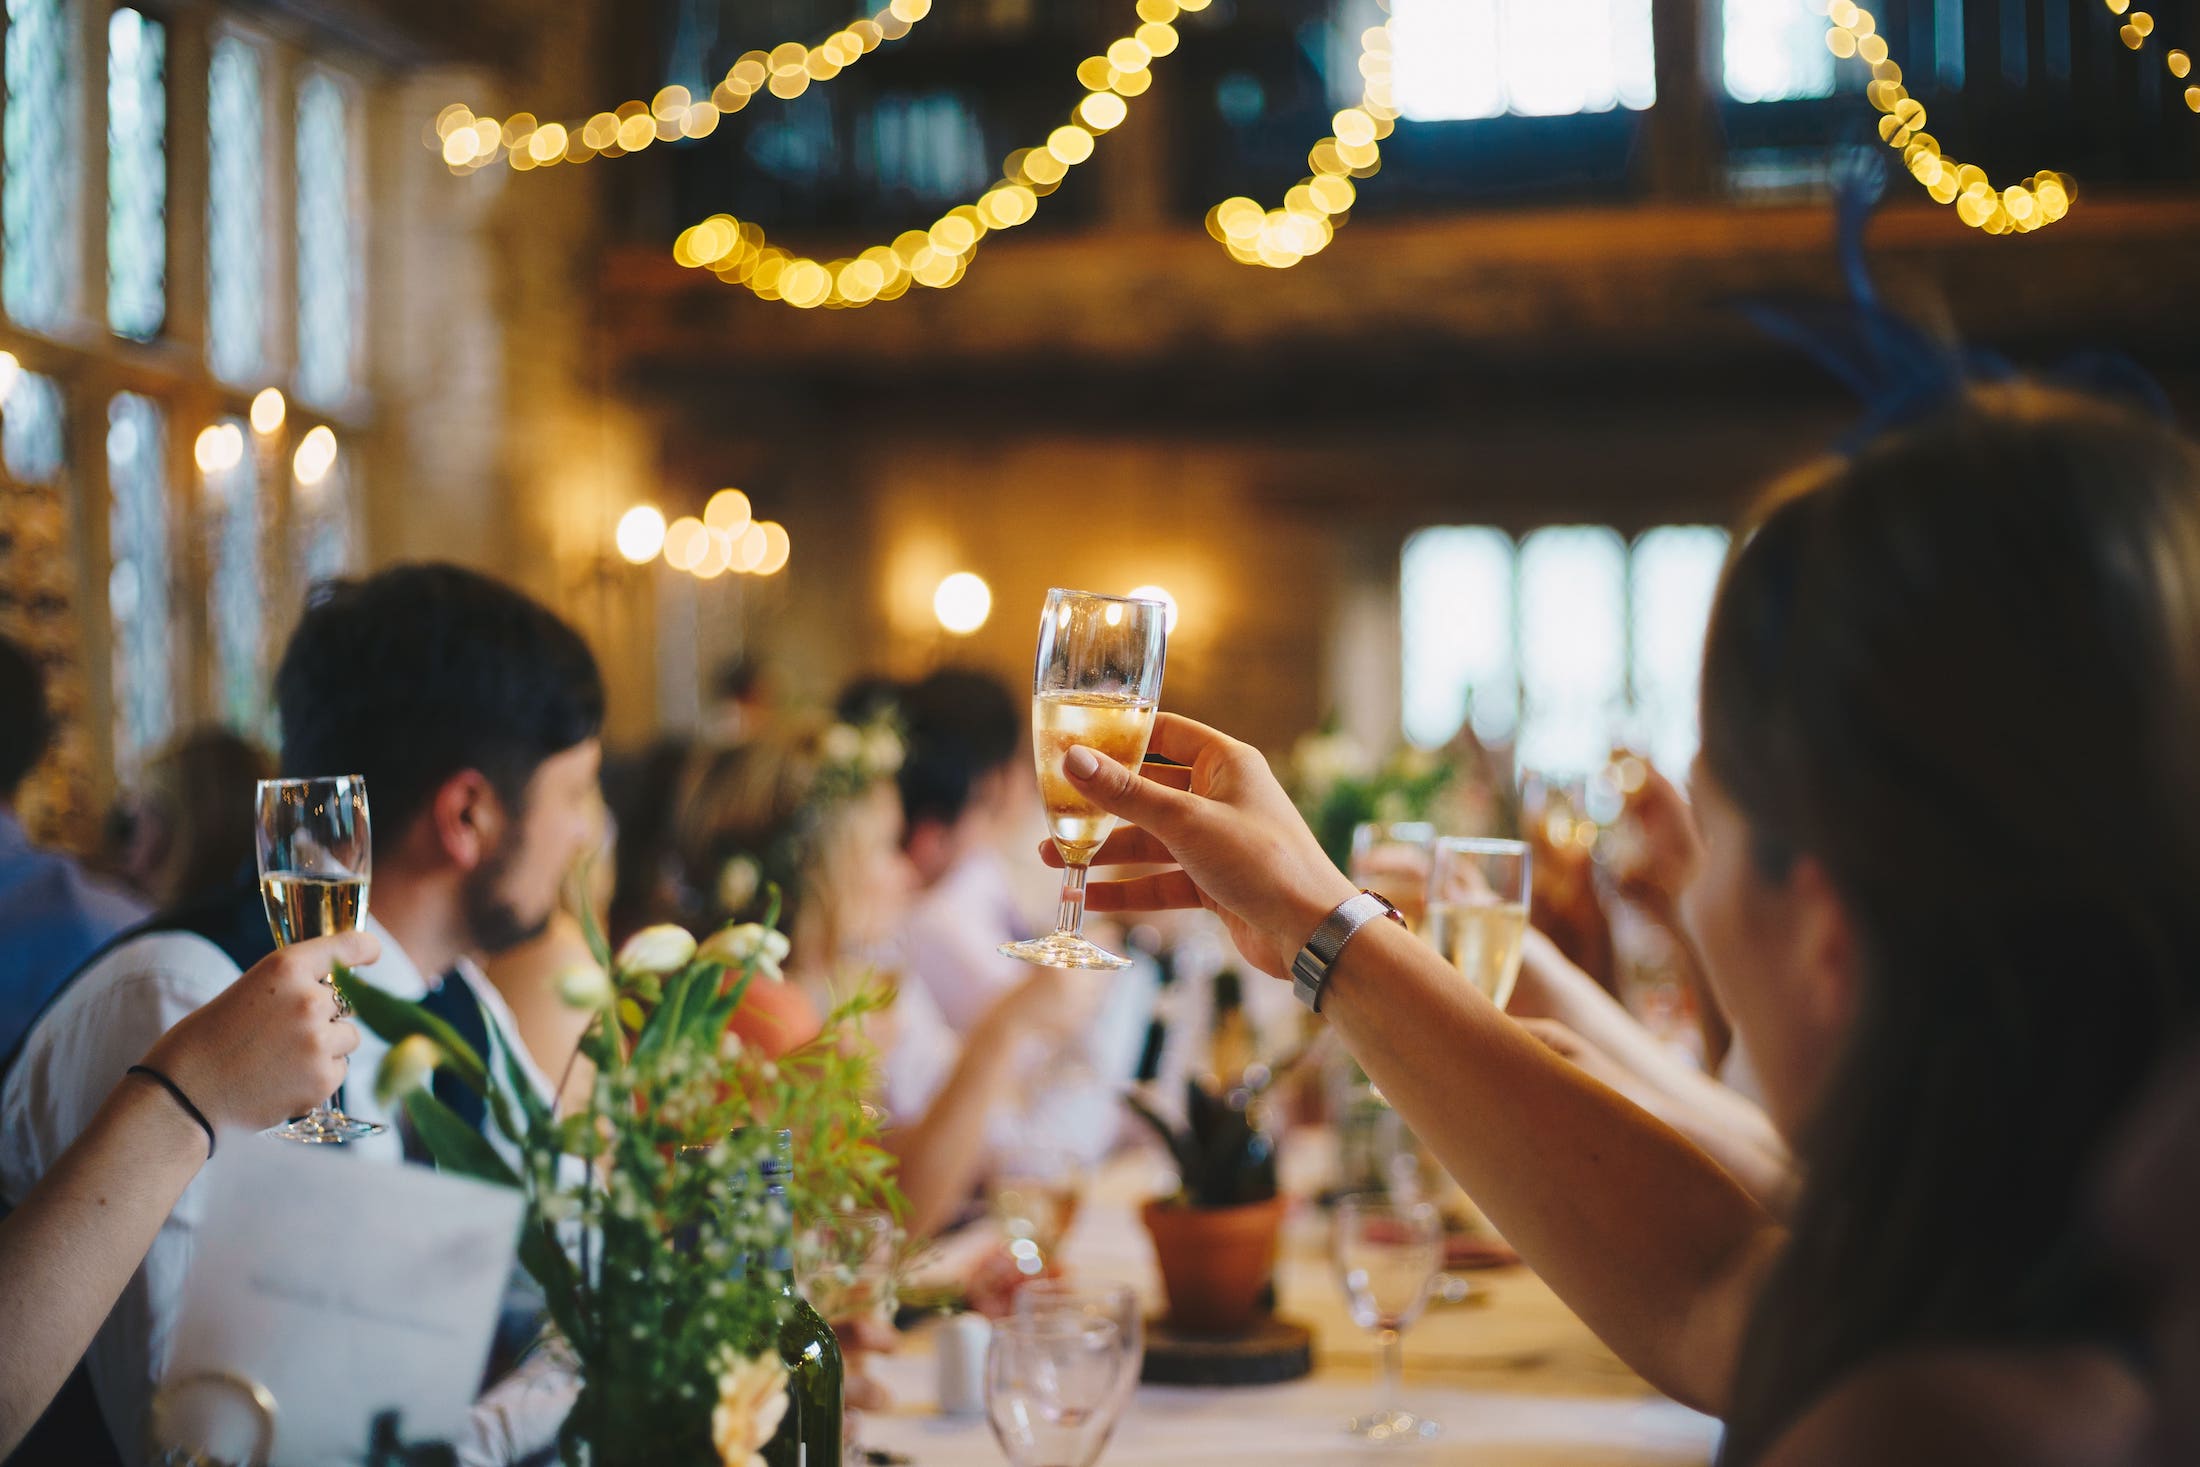 People toasting at a wedding